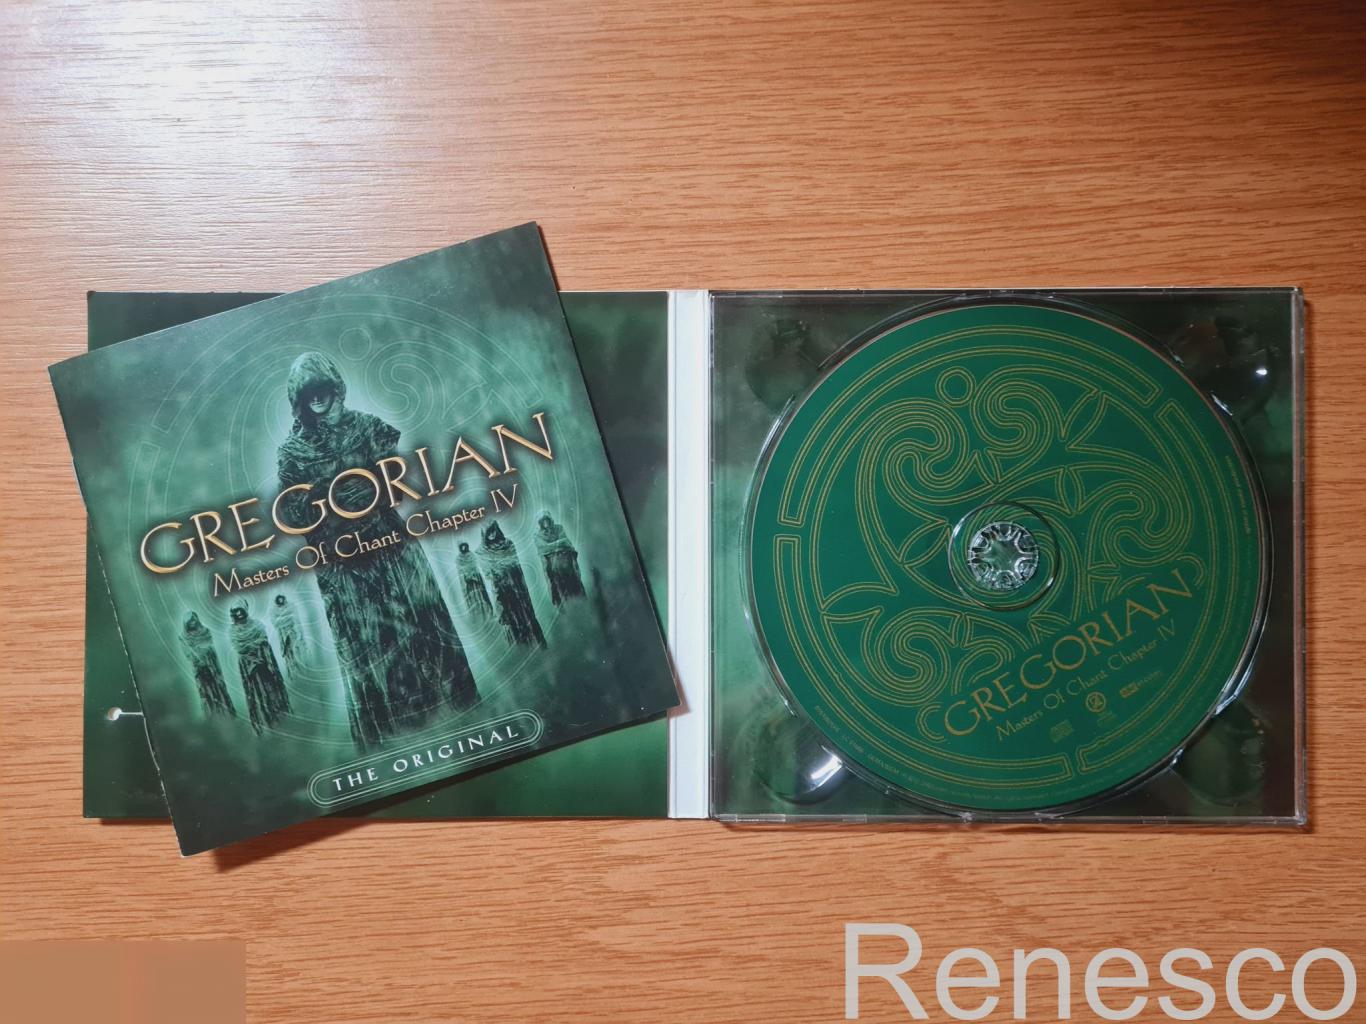 Gregorian ?– Masters Of Chant Chapter IV. Limited Edition (Germany) (2003) 2